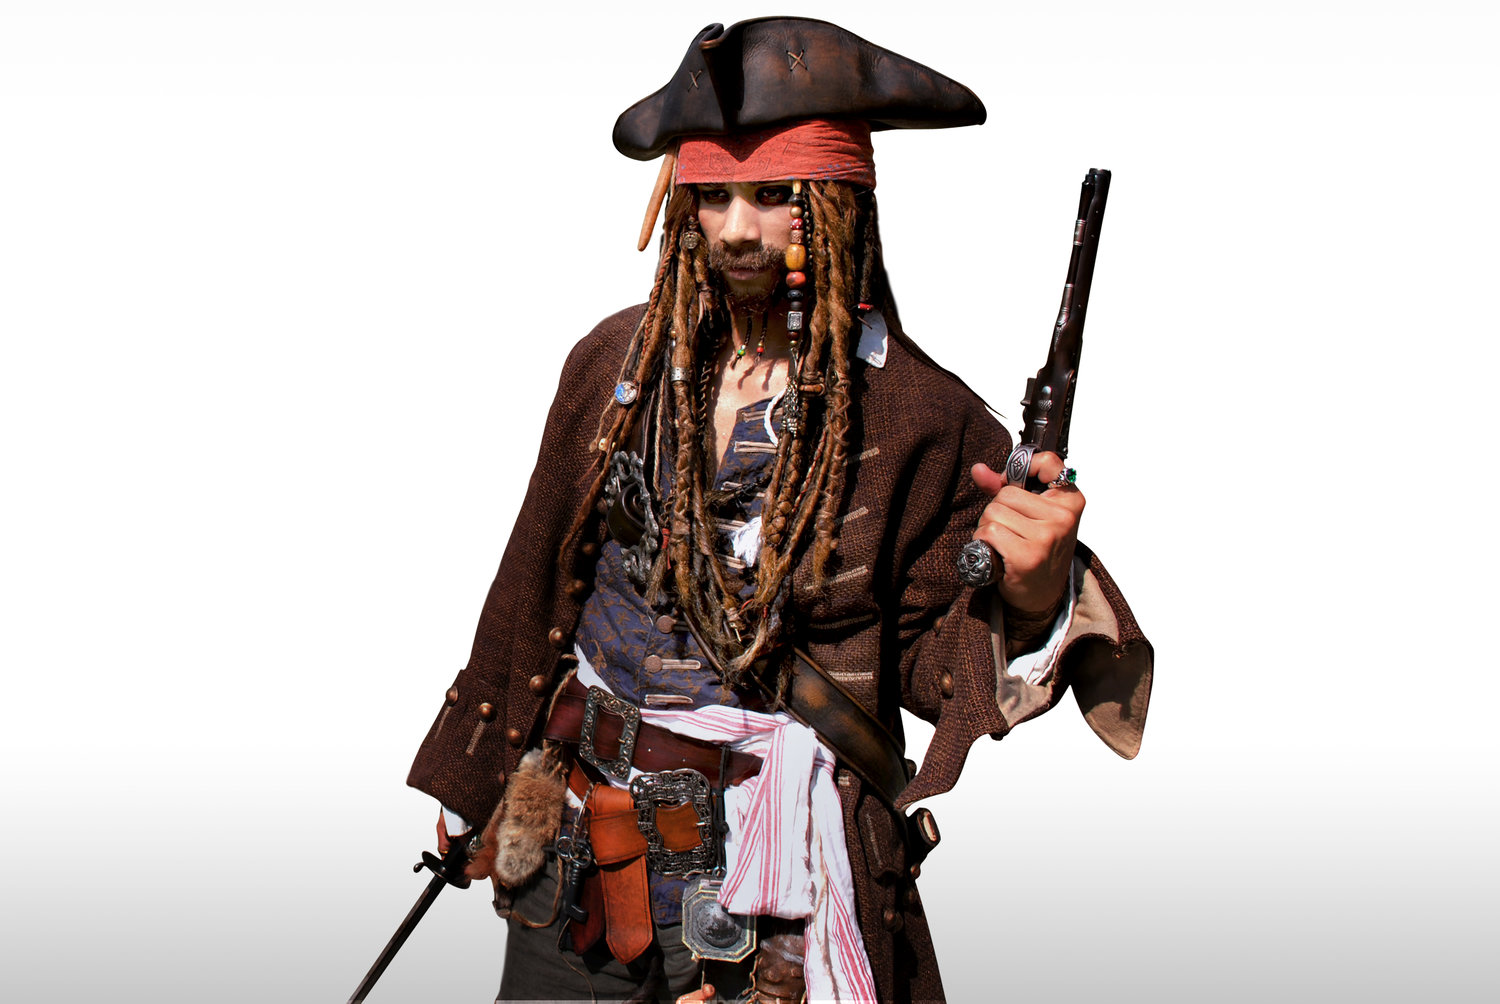 Captain Jack Sparrow Hat With Dreadlocks Pirates of the Caribbean Costume Movie